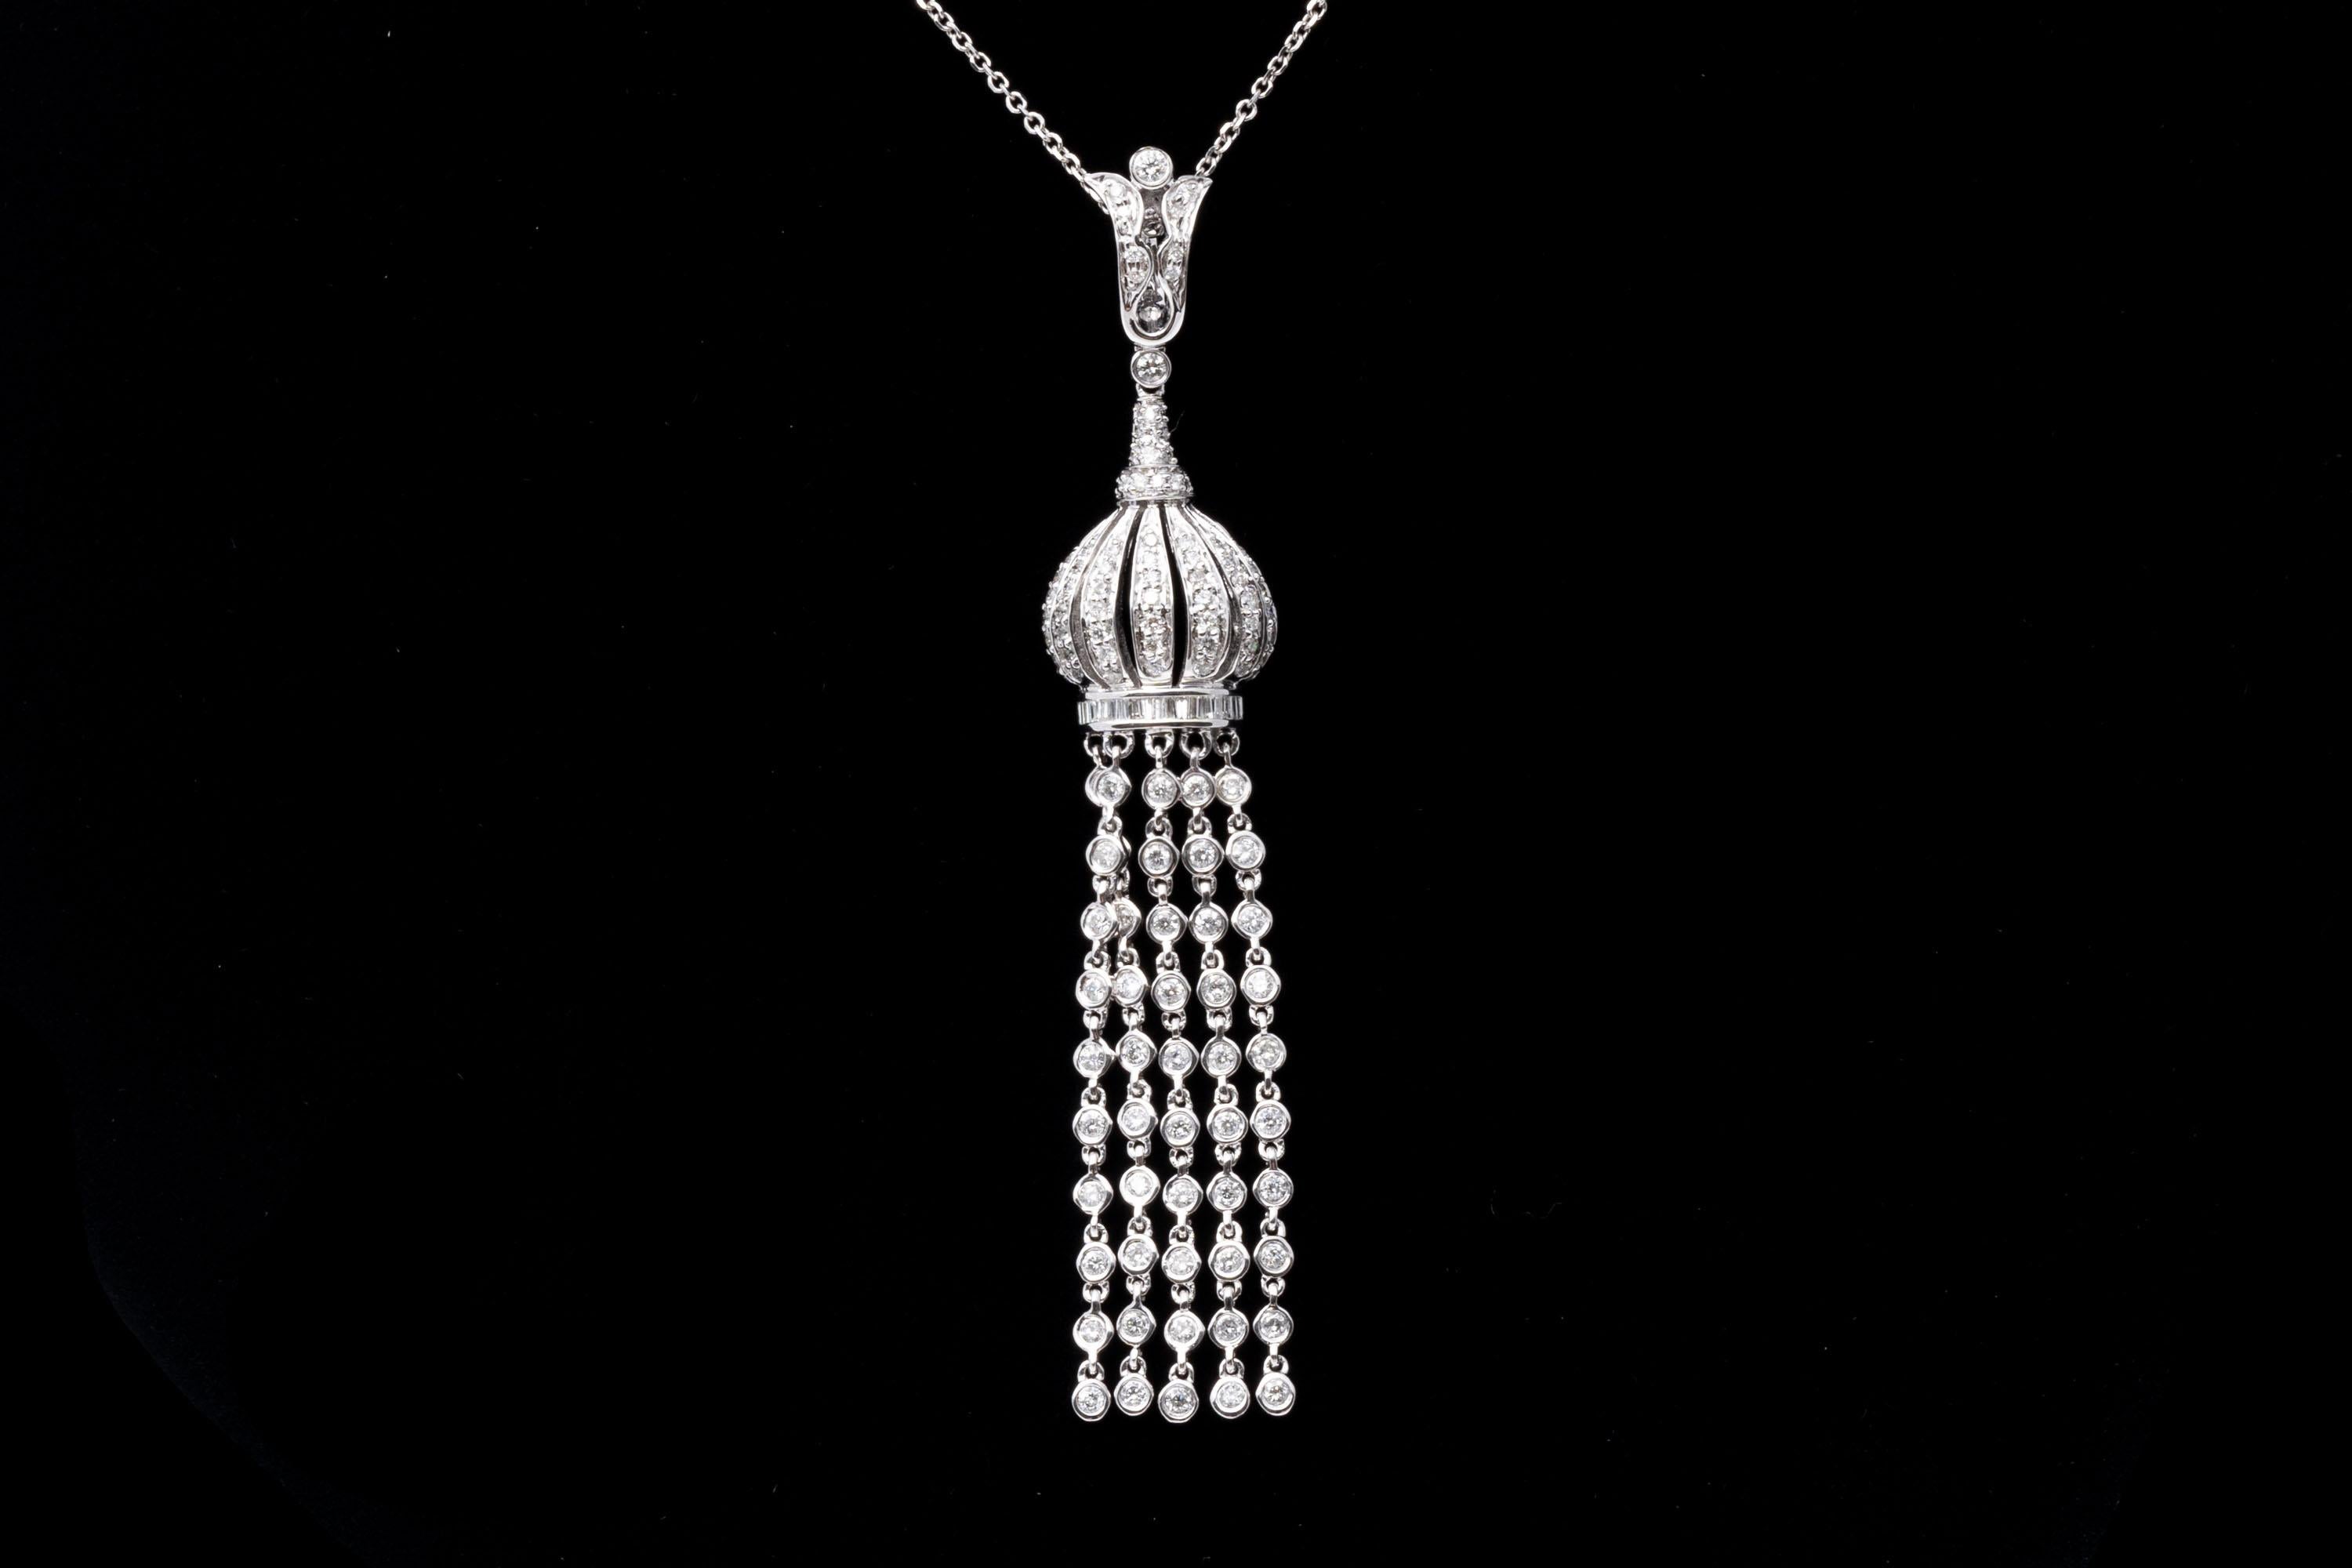 14K white gold and diamond necklace and pendant. A delicate chain supports a lavish and lively pendant with diamonds set tassels below a balloon-style top. The pendant's bail is hinged with a safety latch, allowing it to be set onto a variety of